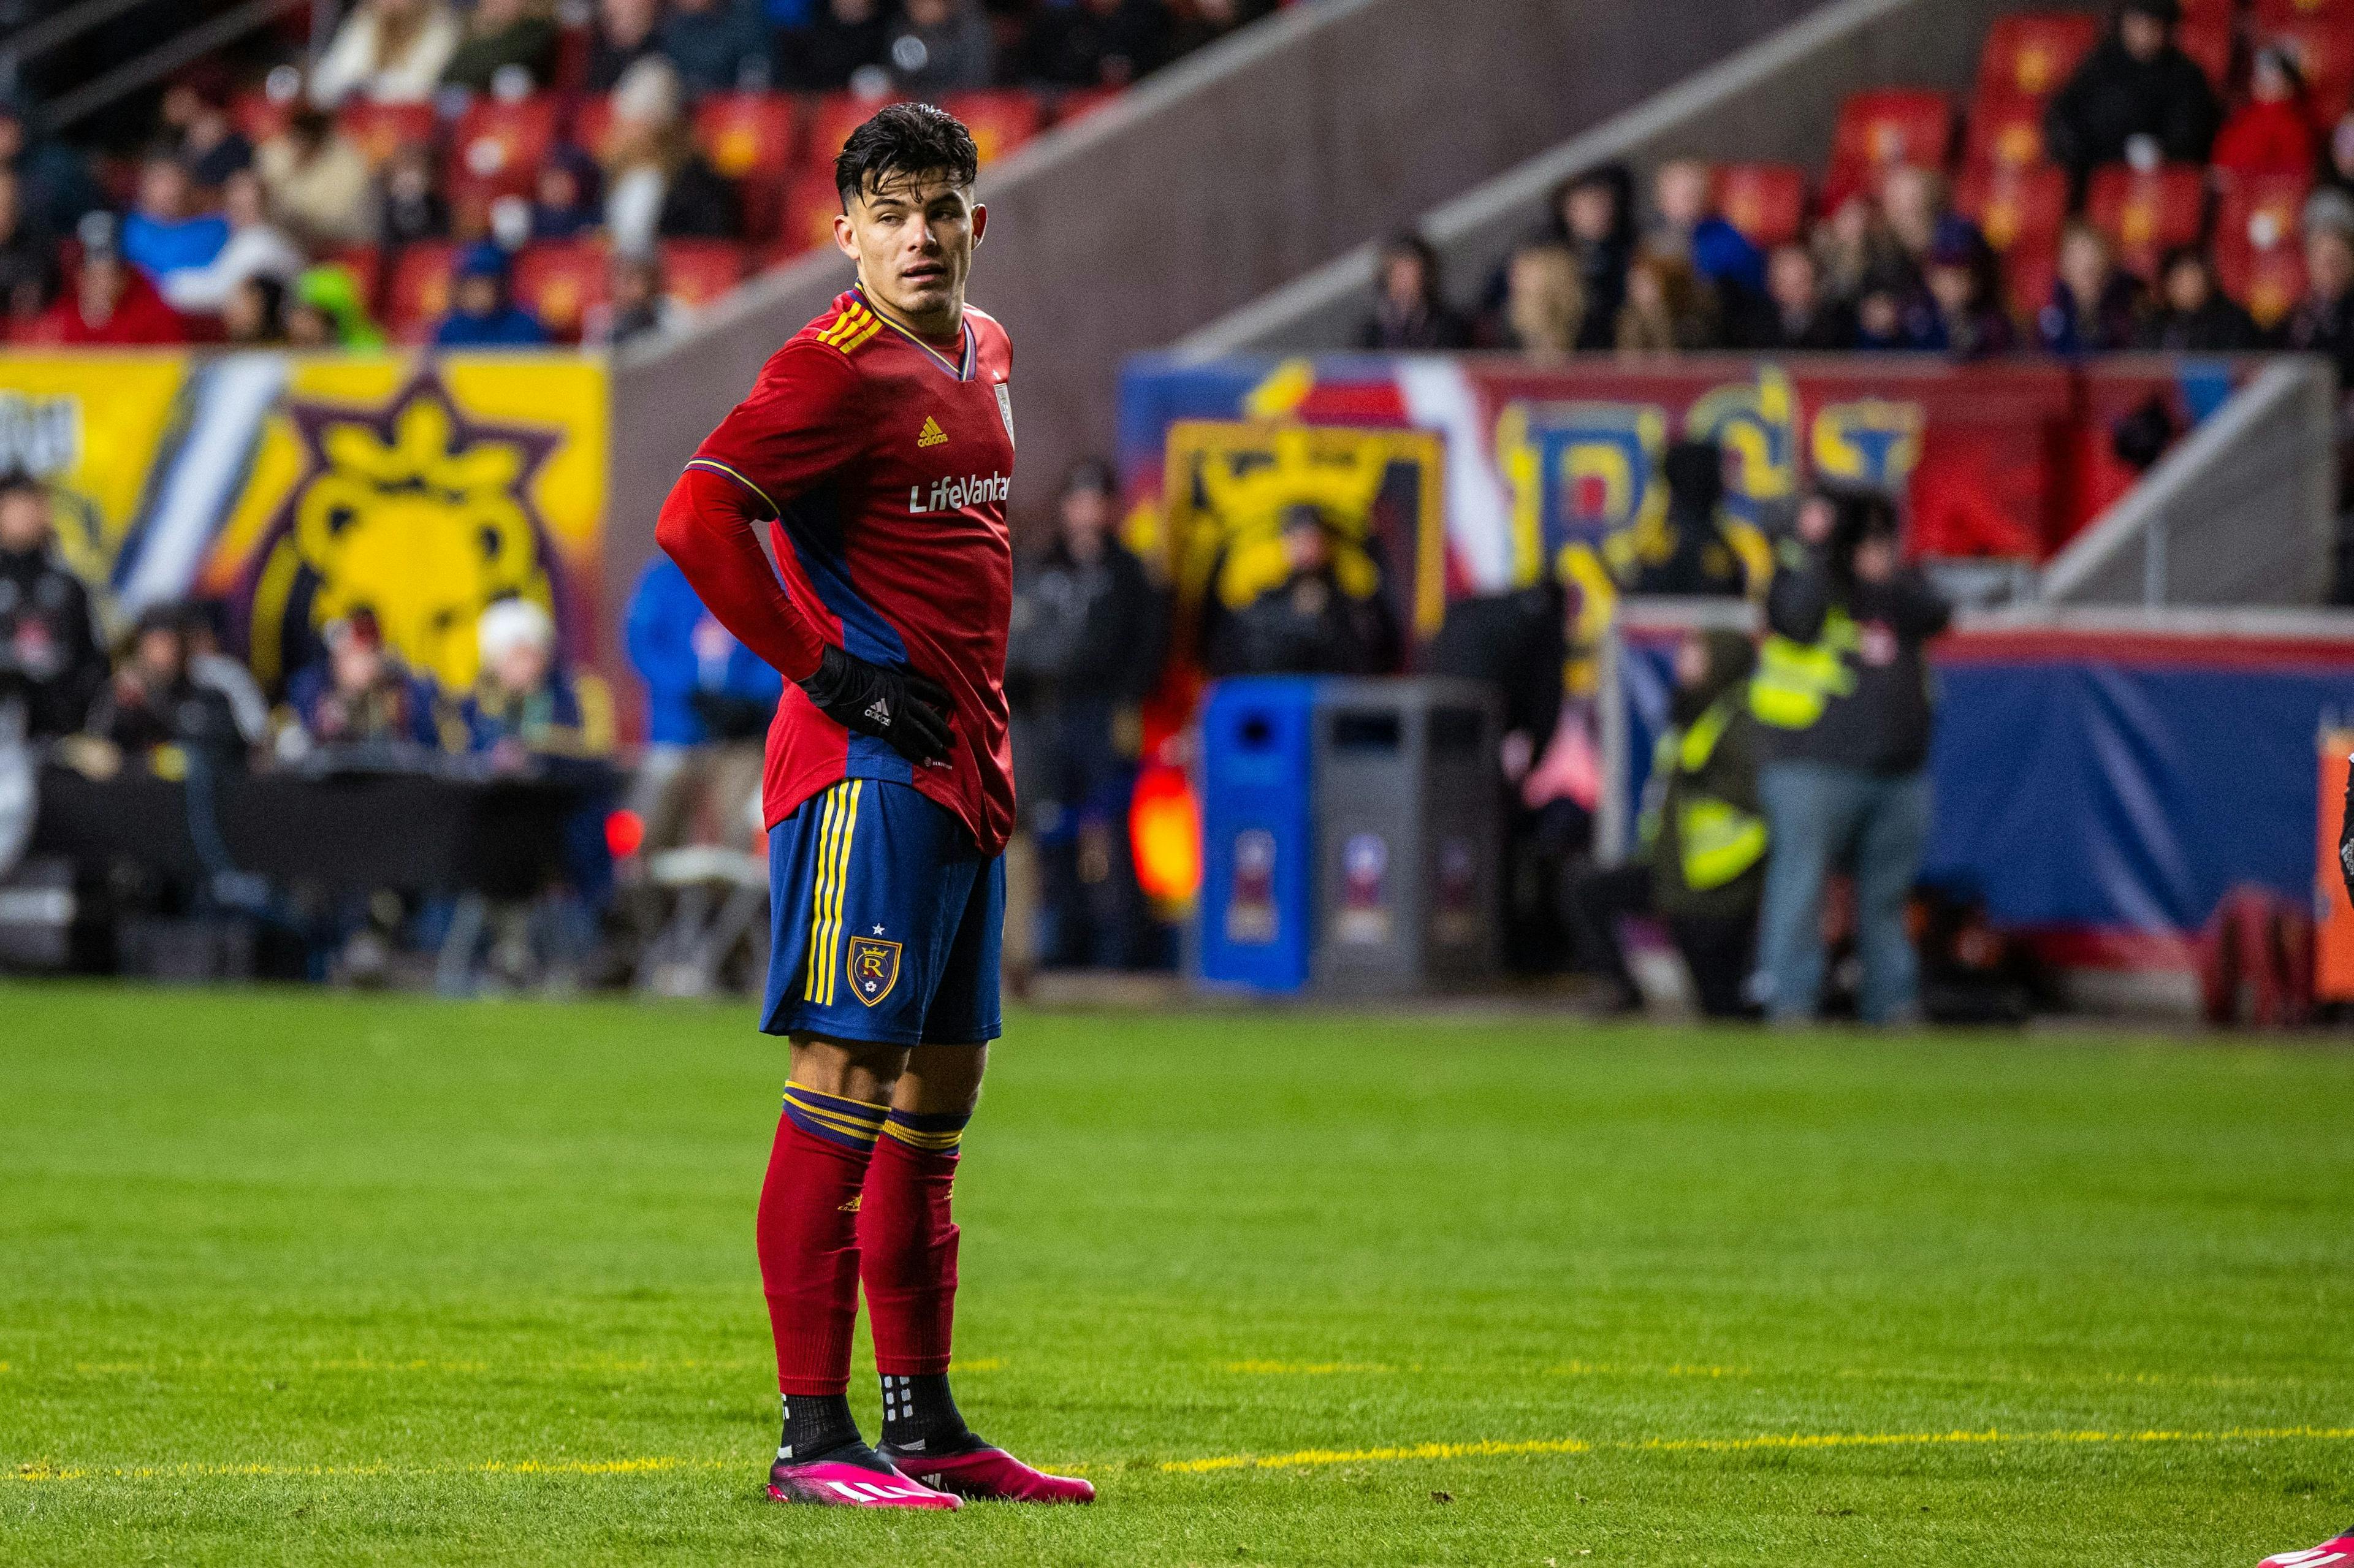 RSL completely outclassed in 4-0 loss against Columbus Crew